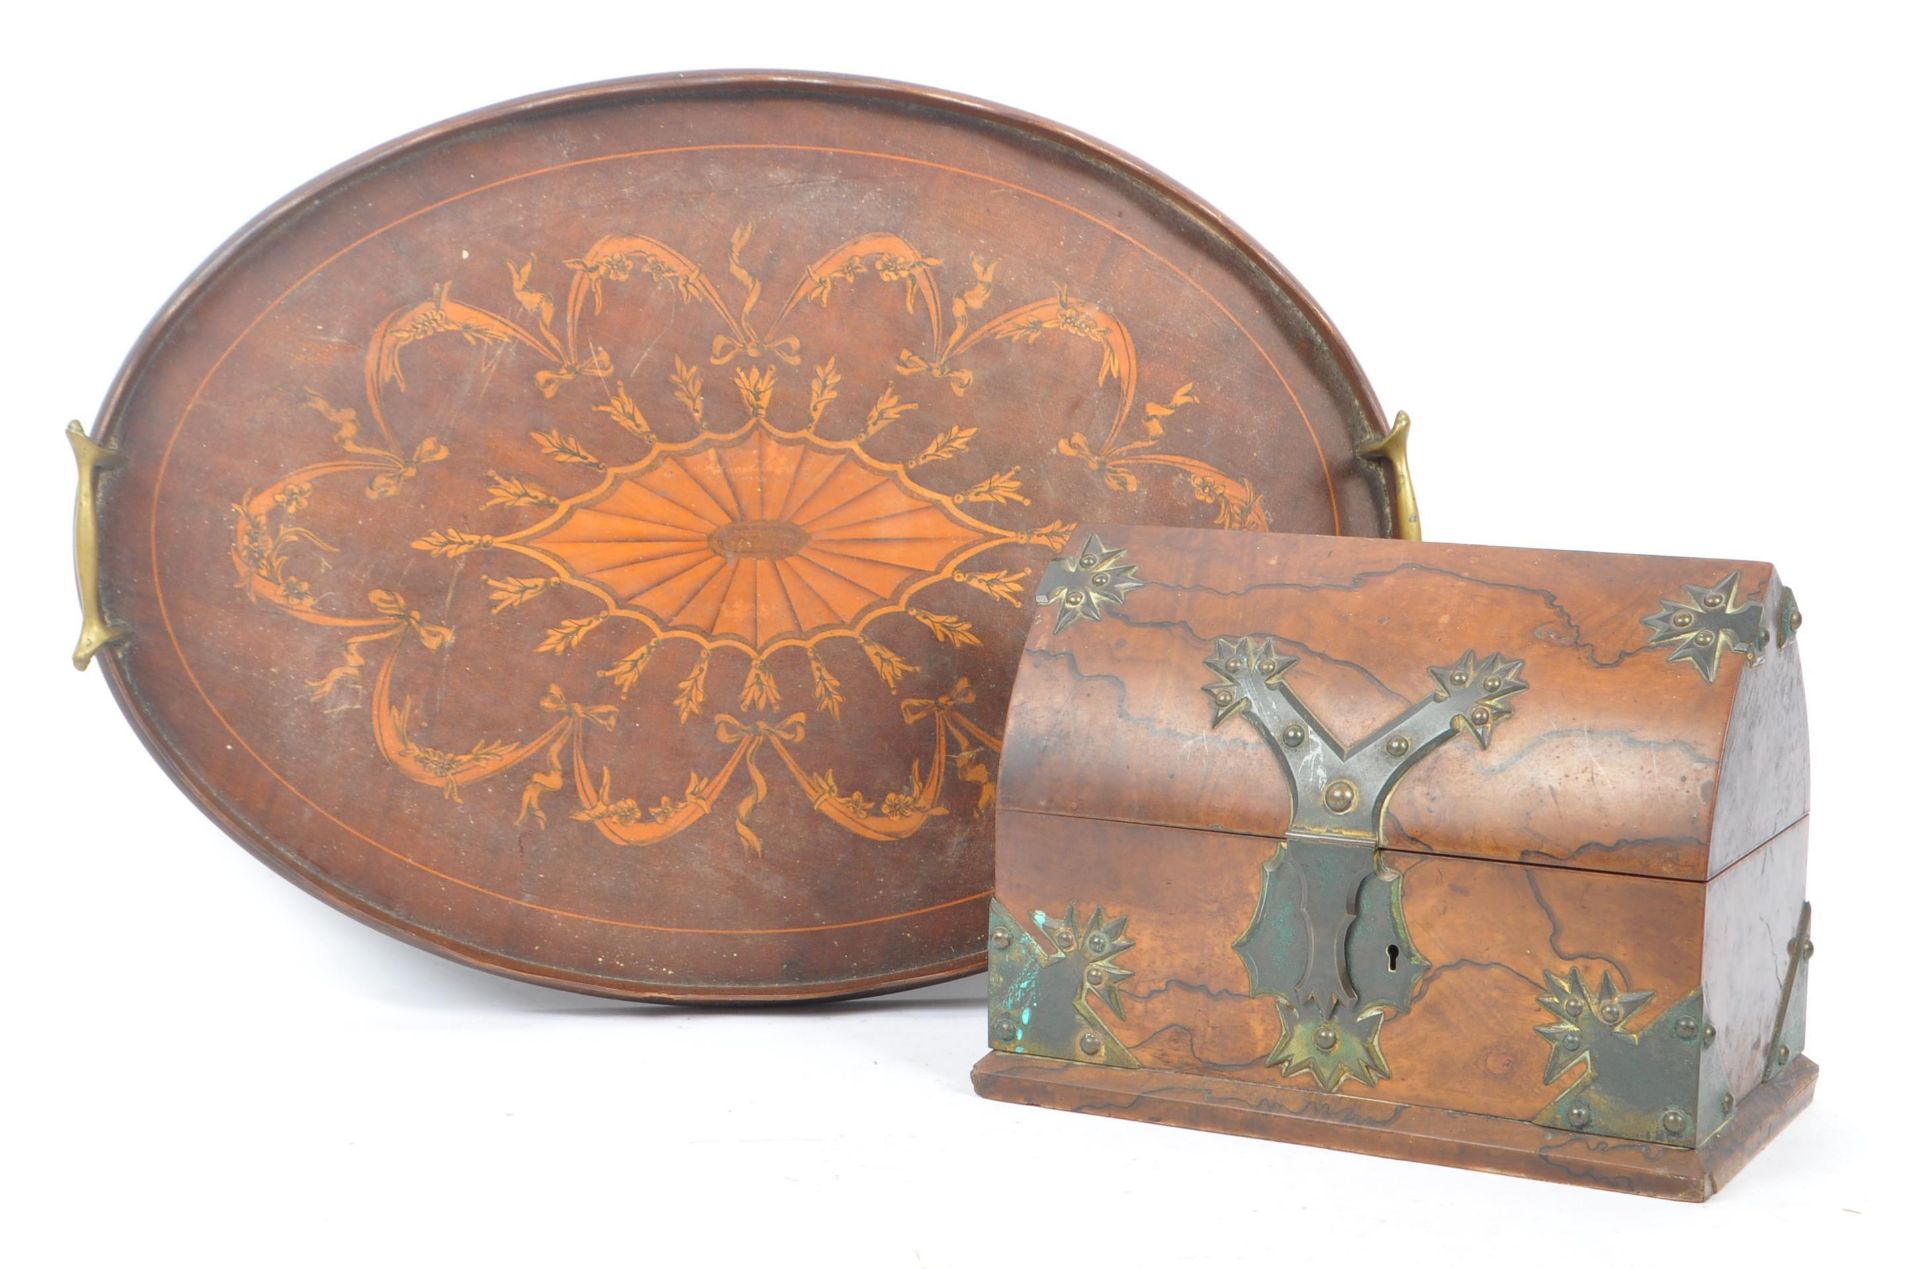 EARLY 20TH CENTURY INLAID TRAY WITH GOTHIC BOX